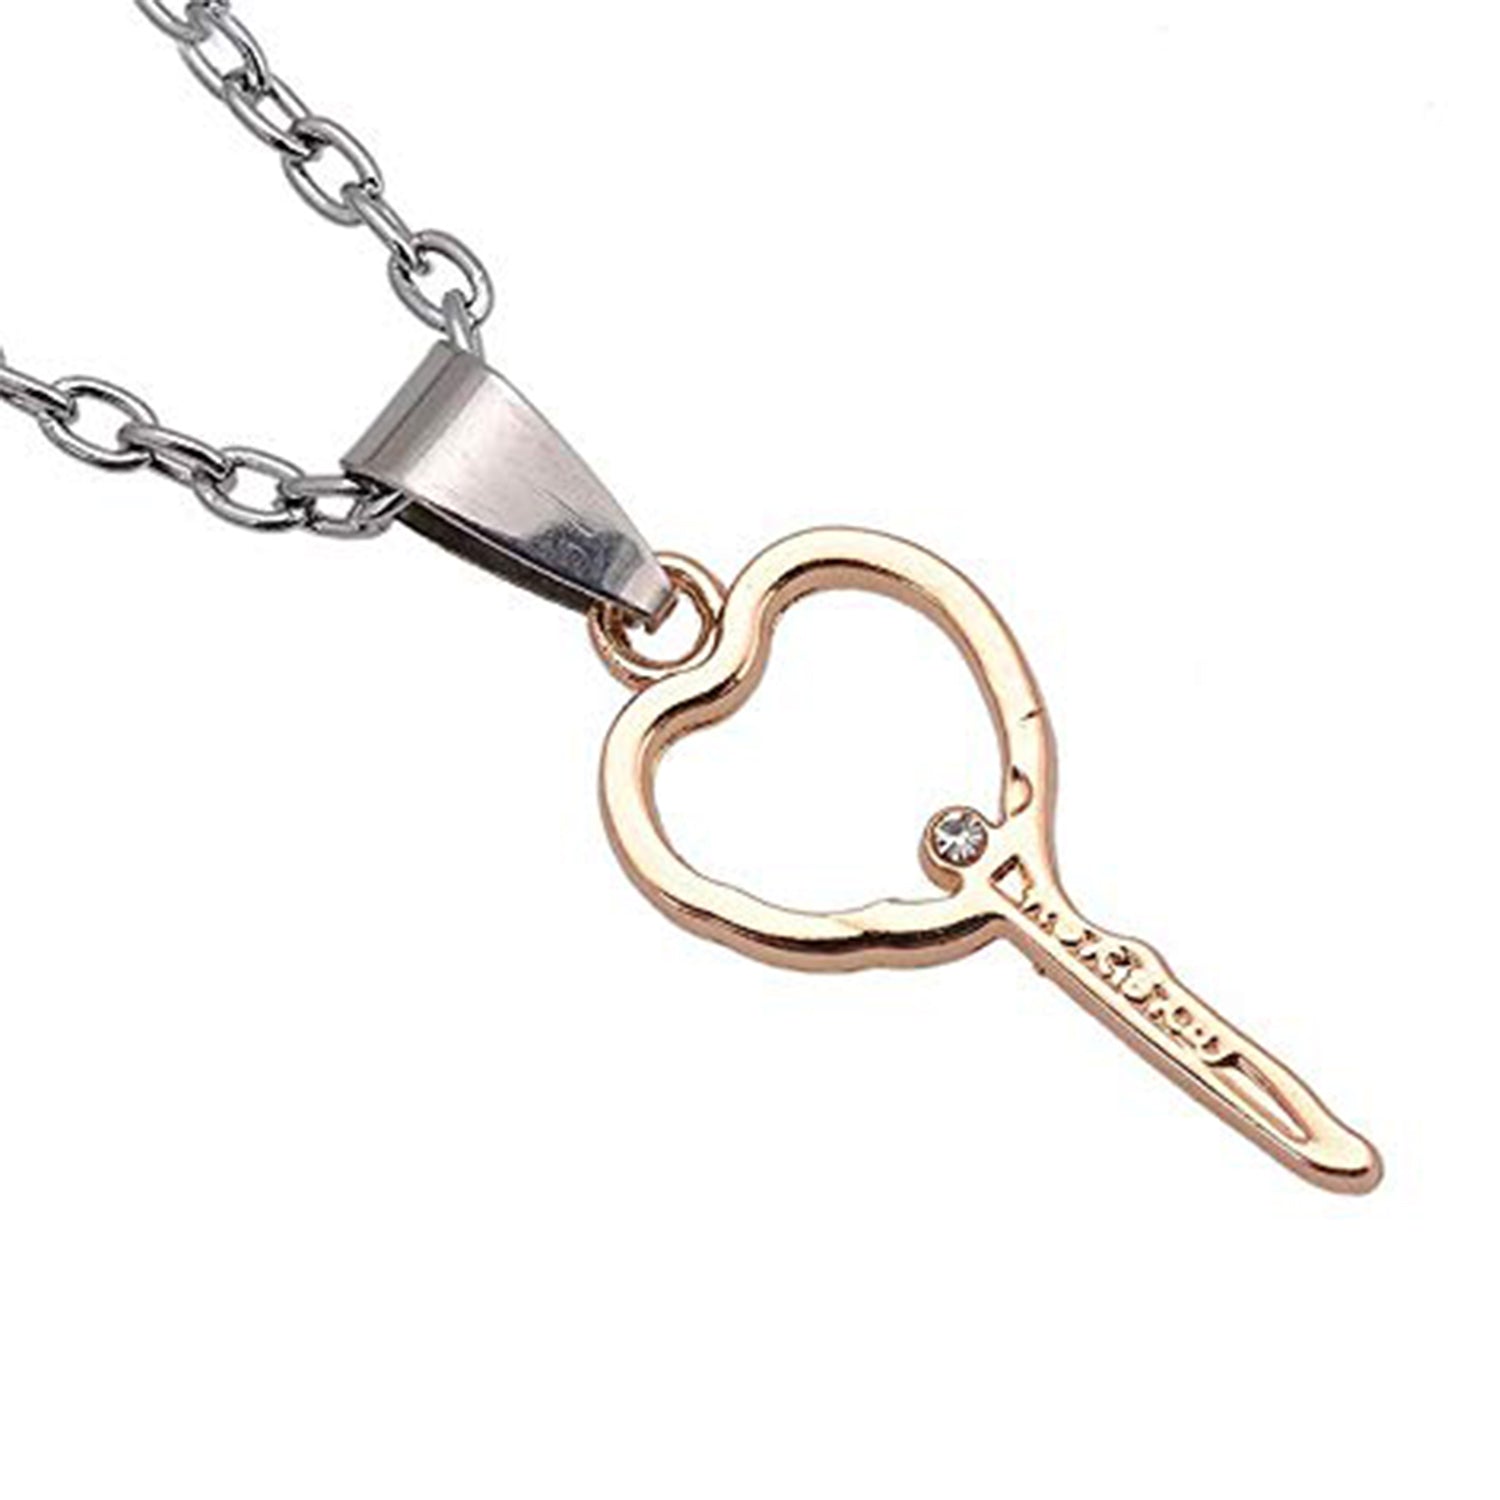 Gold and Silver Color Heart Key Shaped Couple Pendant Necklaces